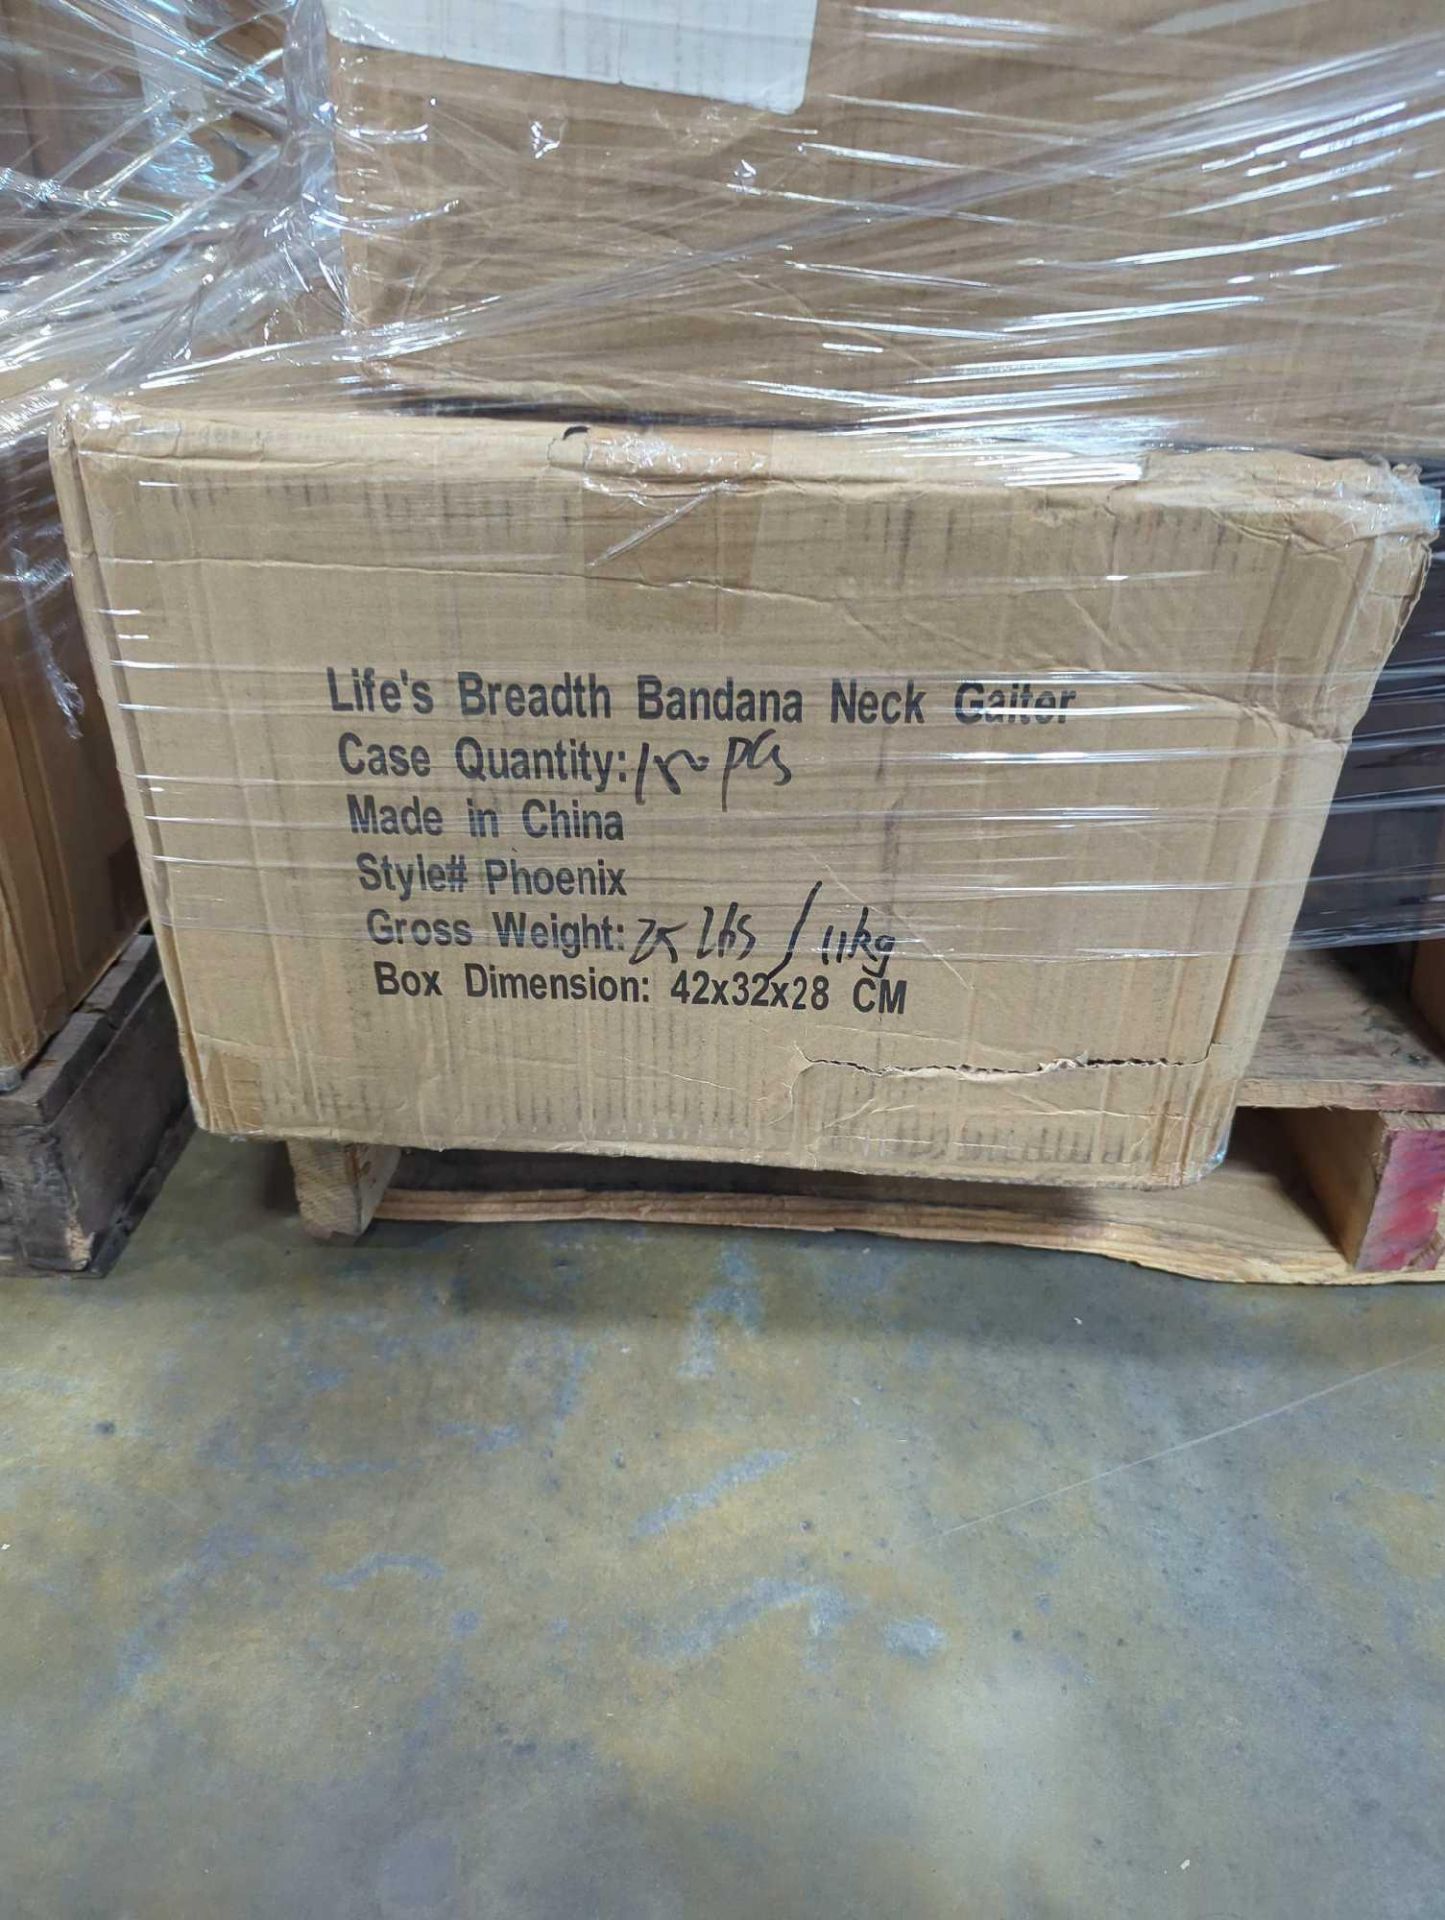 pallet of life's breadth neck gaiters and face masks - Image 8 of 8